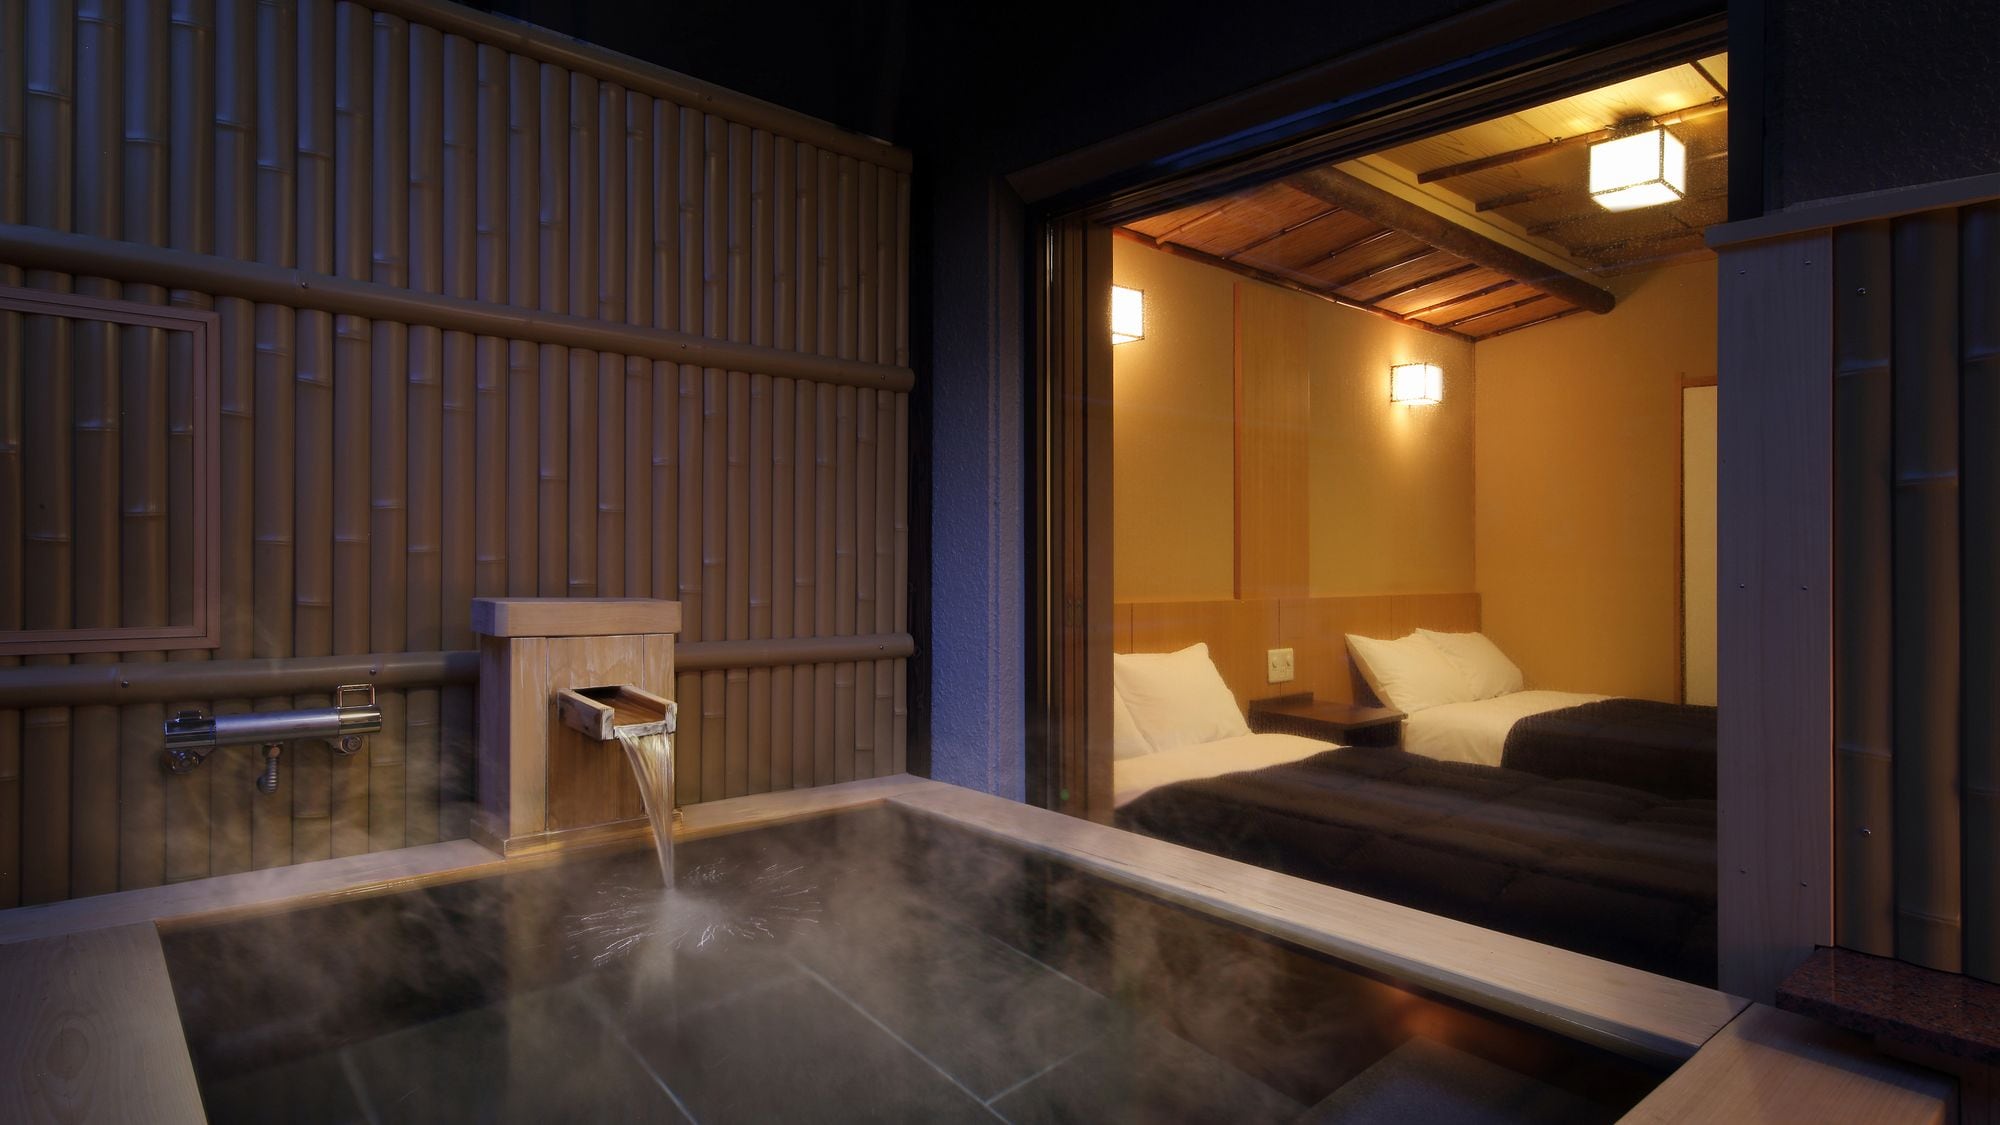 ◆ Guest room with open-air bath in Hachibankan (example)